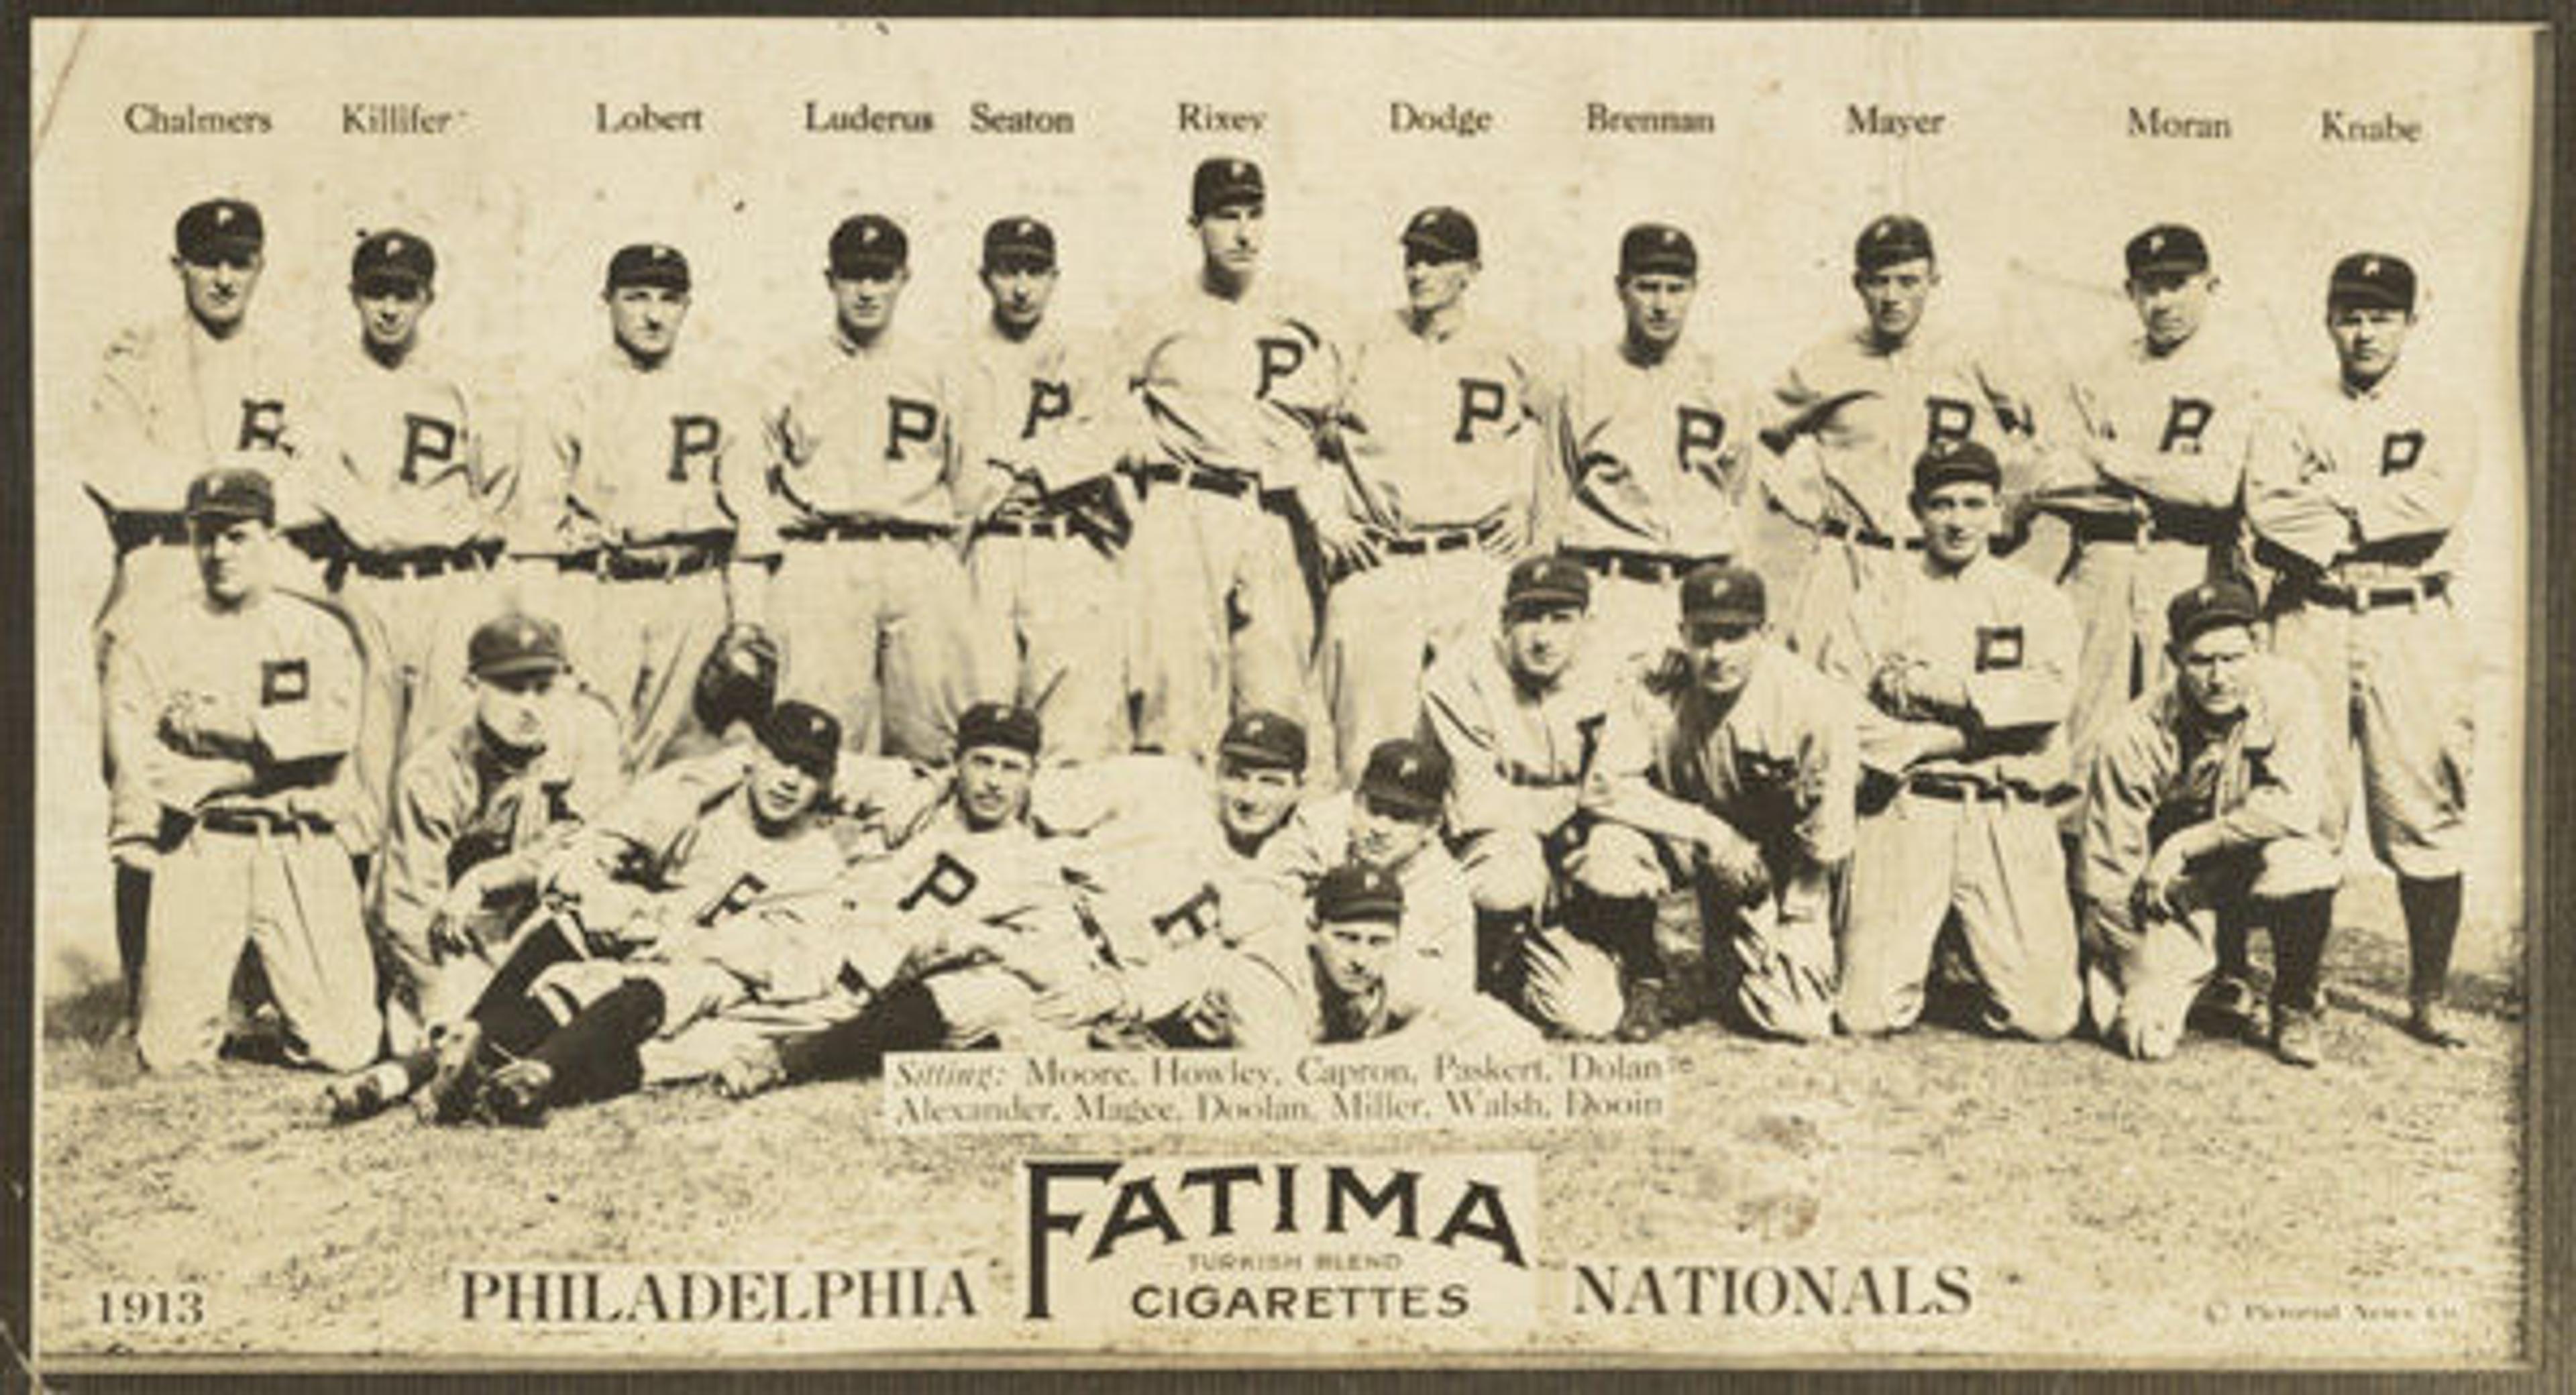 Liggett & Myers Tobacco Company (American, North Carolina). Philadelphia Phillies, National League, from the Baseball Team series (T200), issued by Liggett & Myers Tobacco Company to promote Fatima Turkish Blend Cigarettes, 1913. Photograph; sheet: 2 11/16 x 4 3/4 in. (6.9 x 12.1 cm). The Metropolitan Museum of Art, New York, The Jefferson R. Burdick Collection, Gift of Jefferson R. Burdick (63.350.246.200.14). Photographic copyright, The Pictorial News Co.